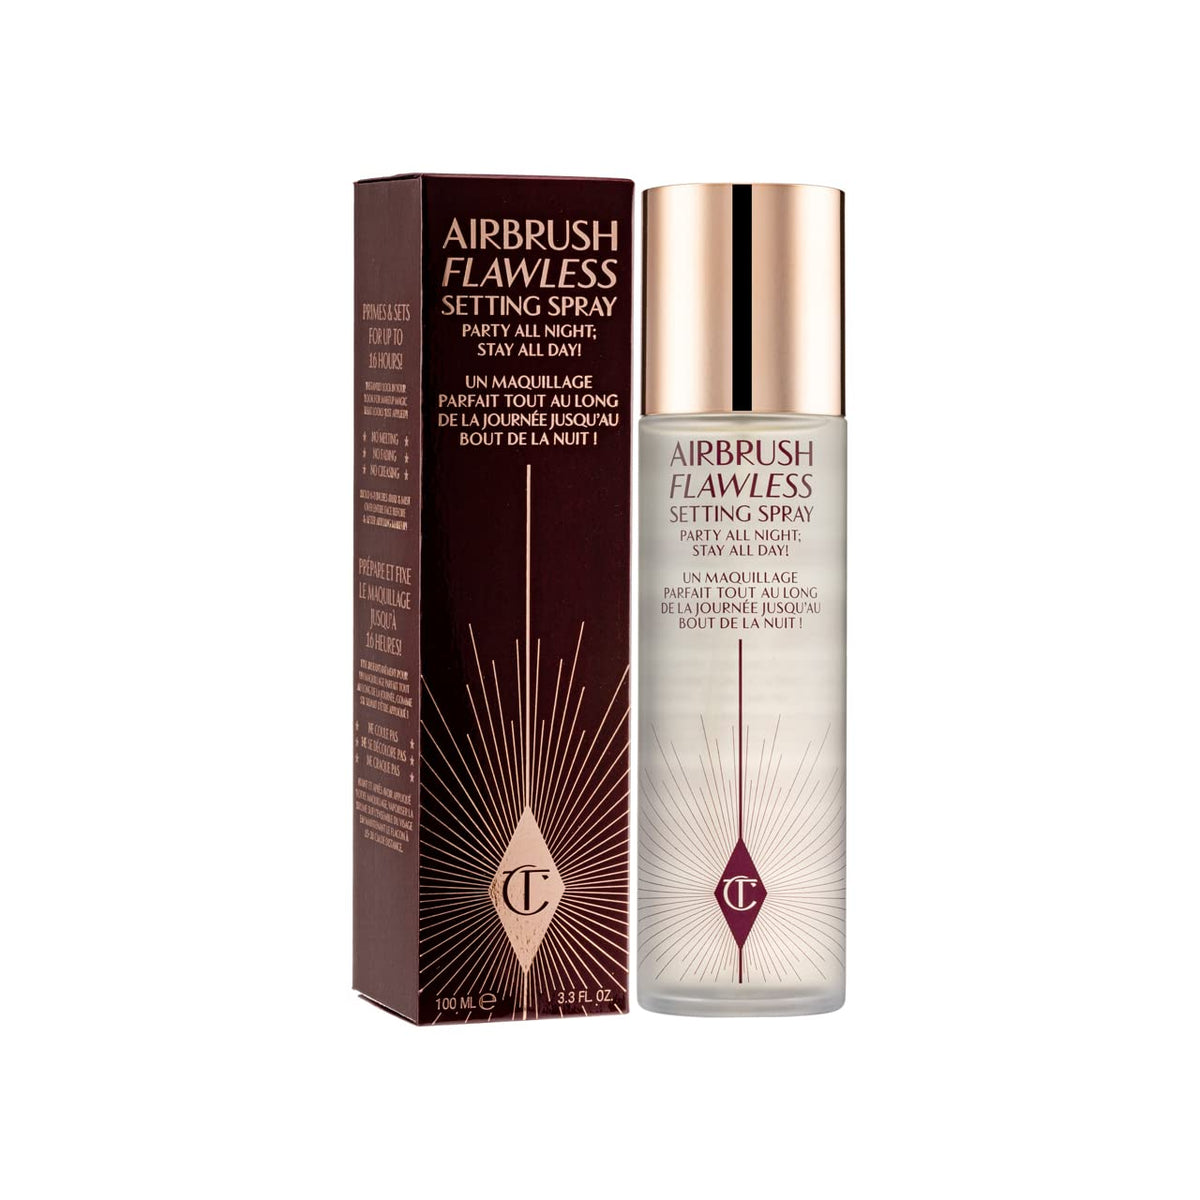 Charlotte Tilbury Airbrush Flawless Party All Night Stay All Day Setting Spray 100Ml